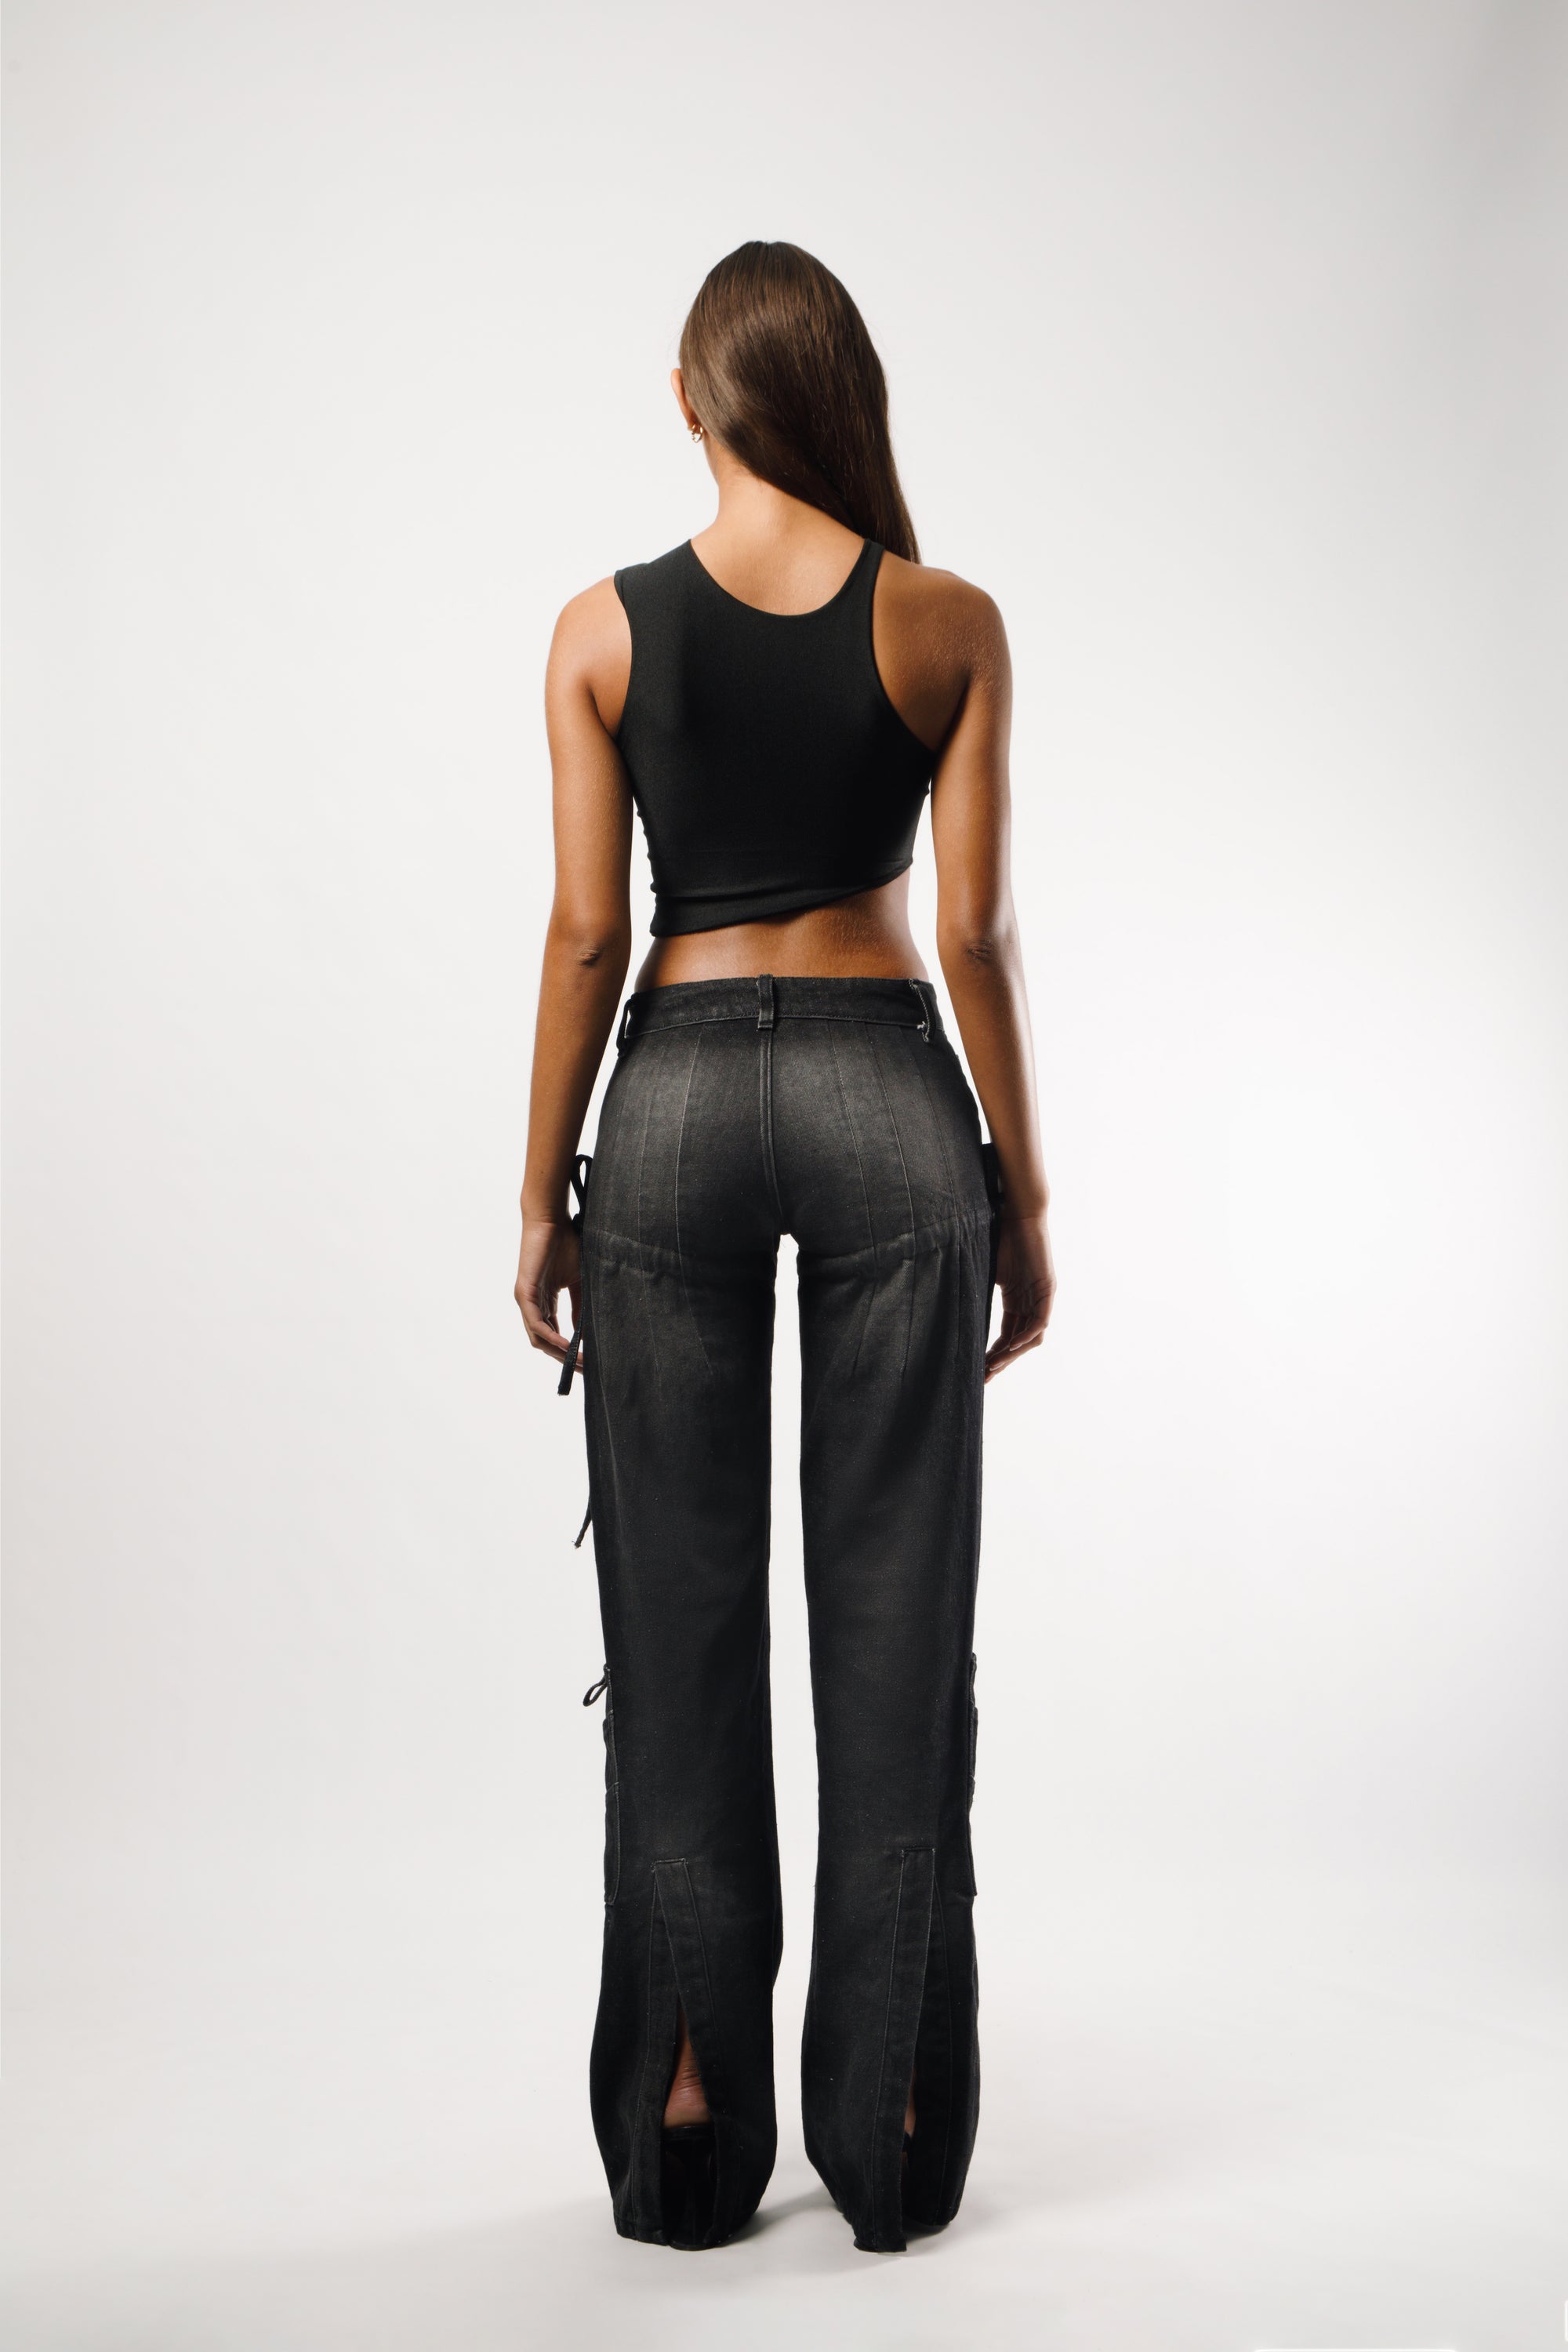   Long pants in washed black cotton with darts and opening slits on the back, adjustable cords to embellish the silhouette - back